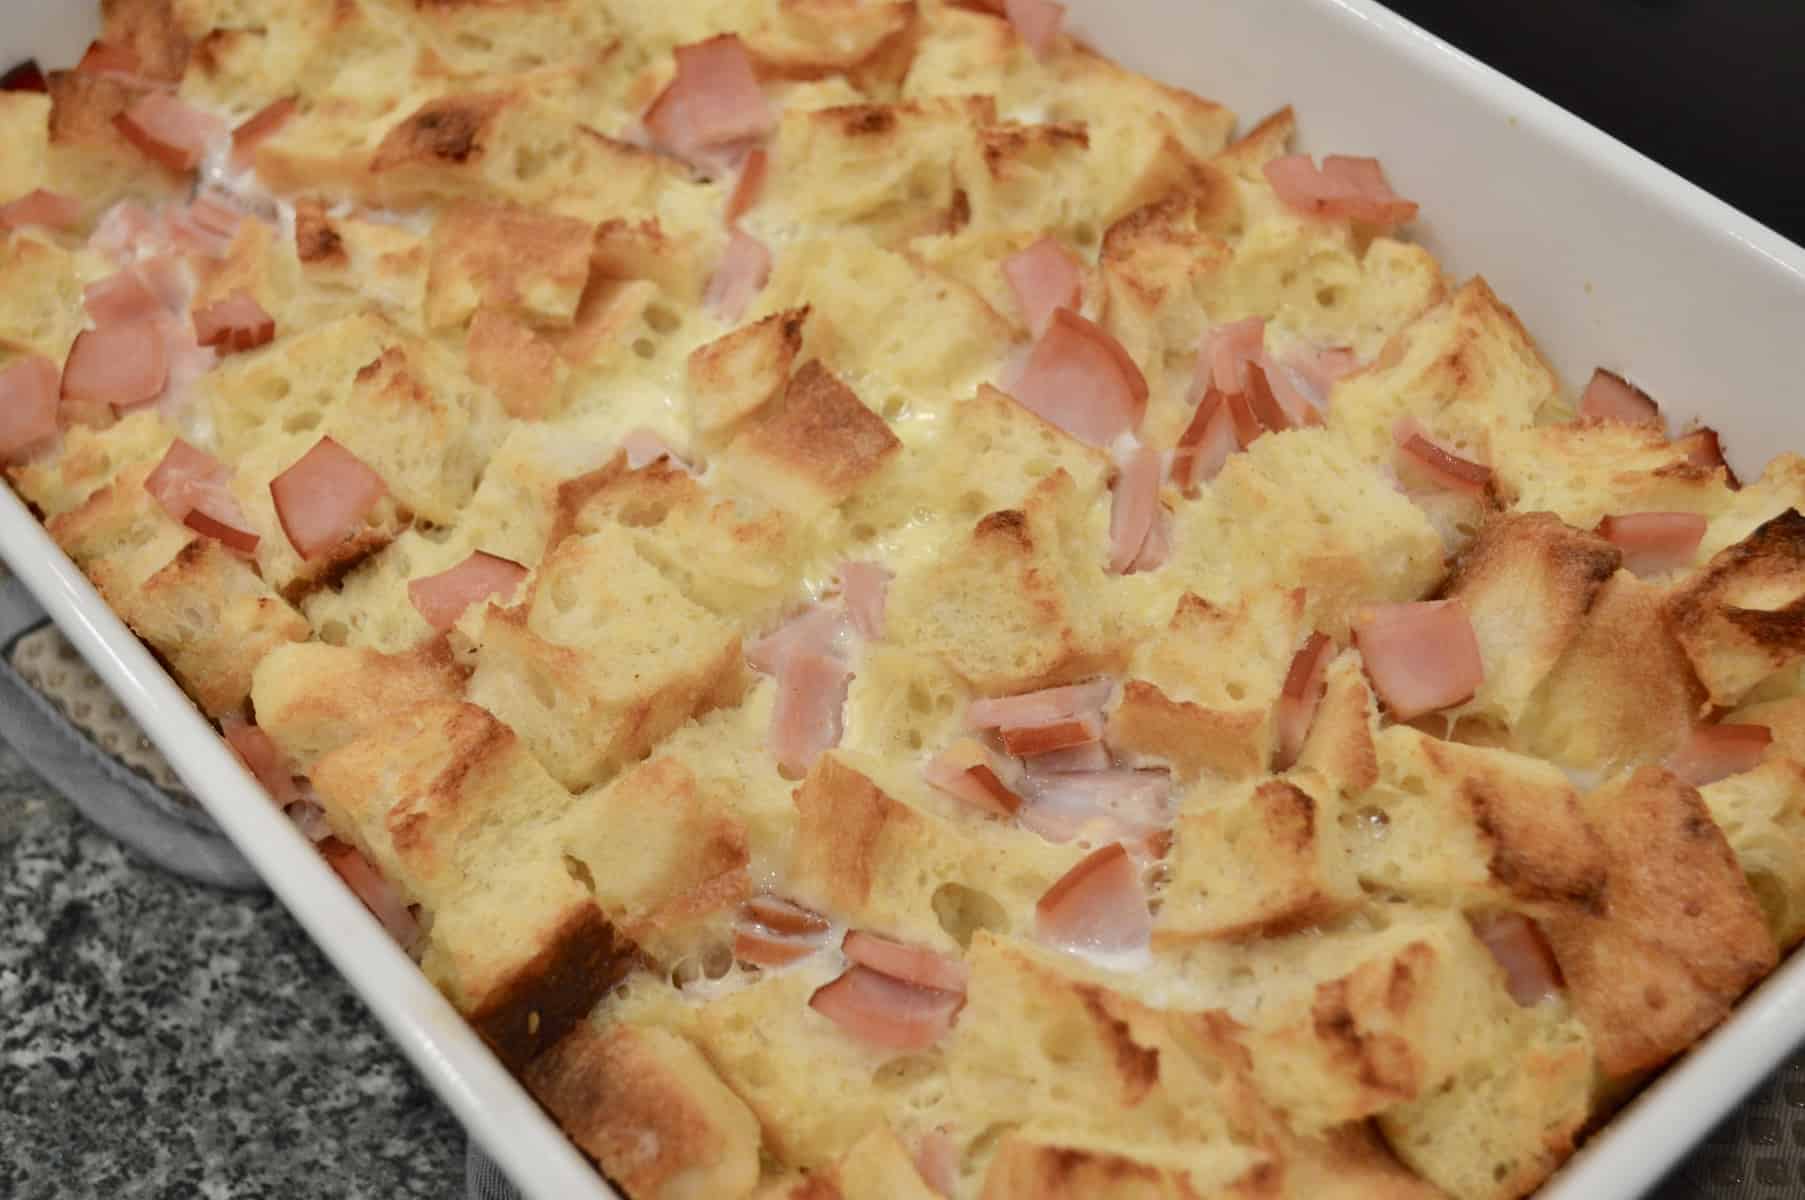 eggs benedict casserole just out of the oven in a white baking dish.